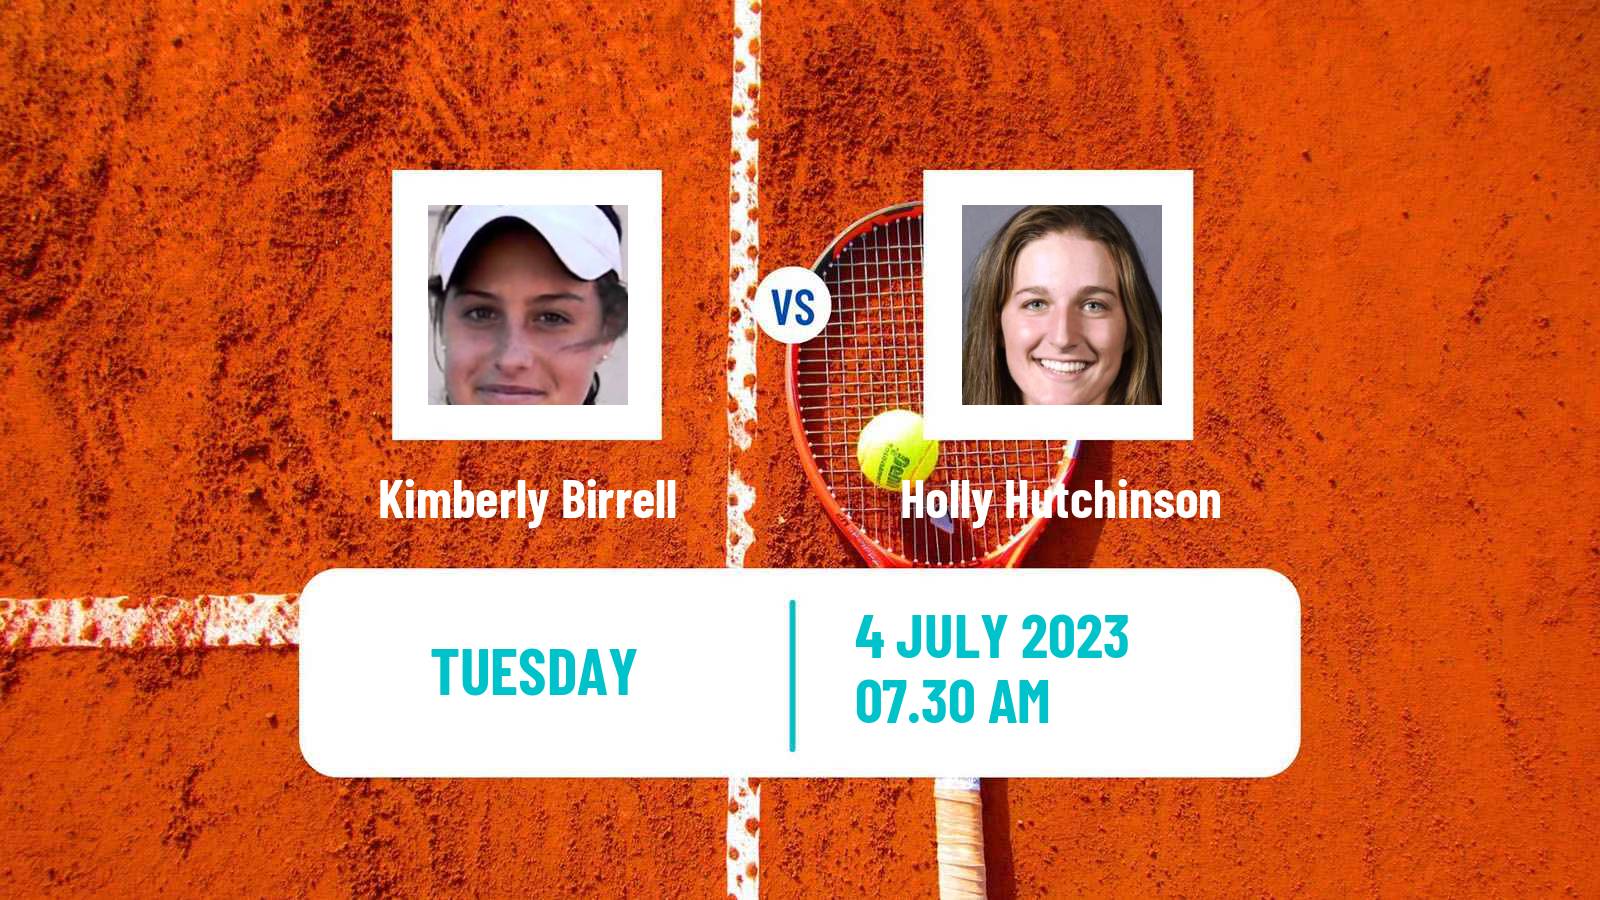 Tennis ITF W25 Cantanhede Women Kimberly Birrell - Holly Hutchinson